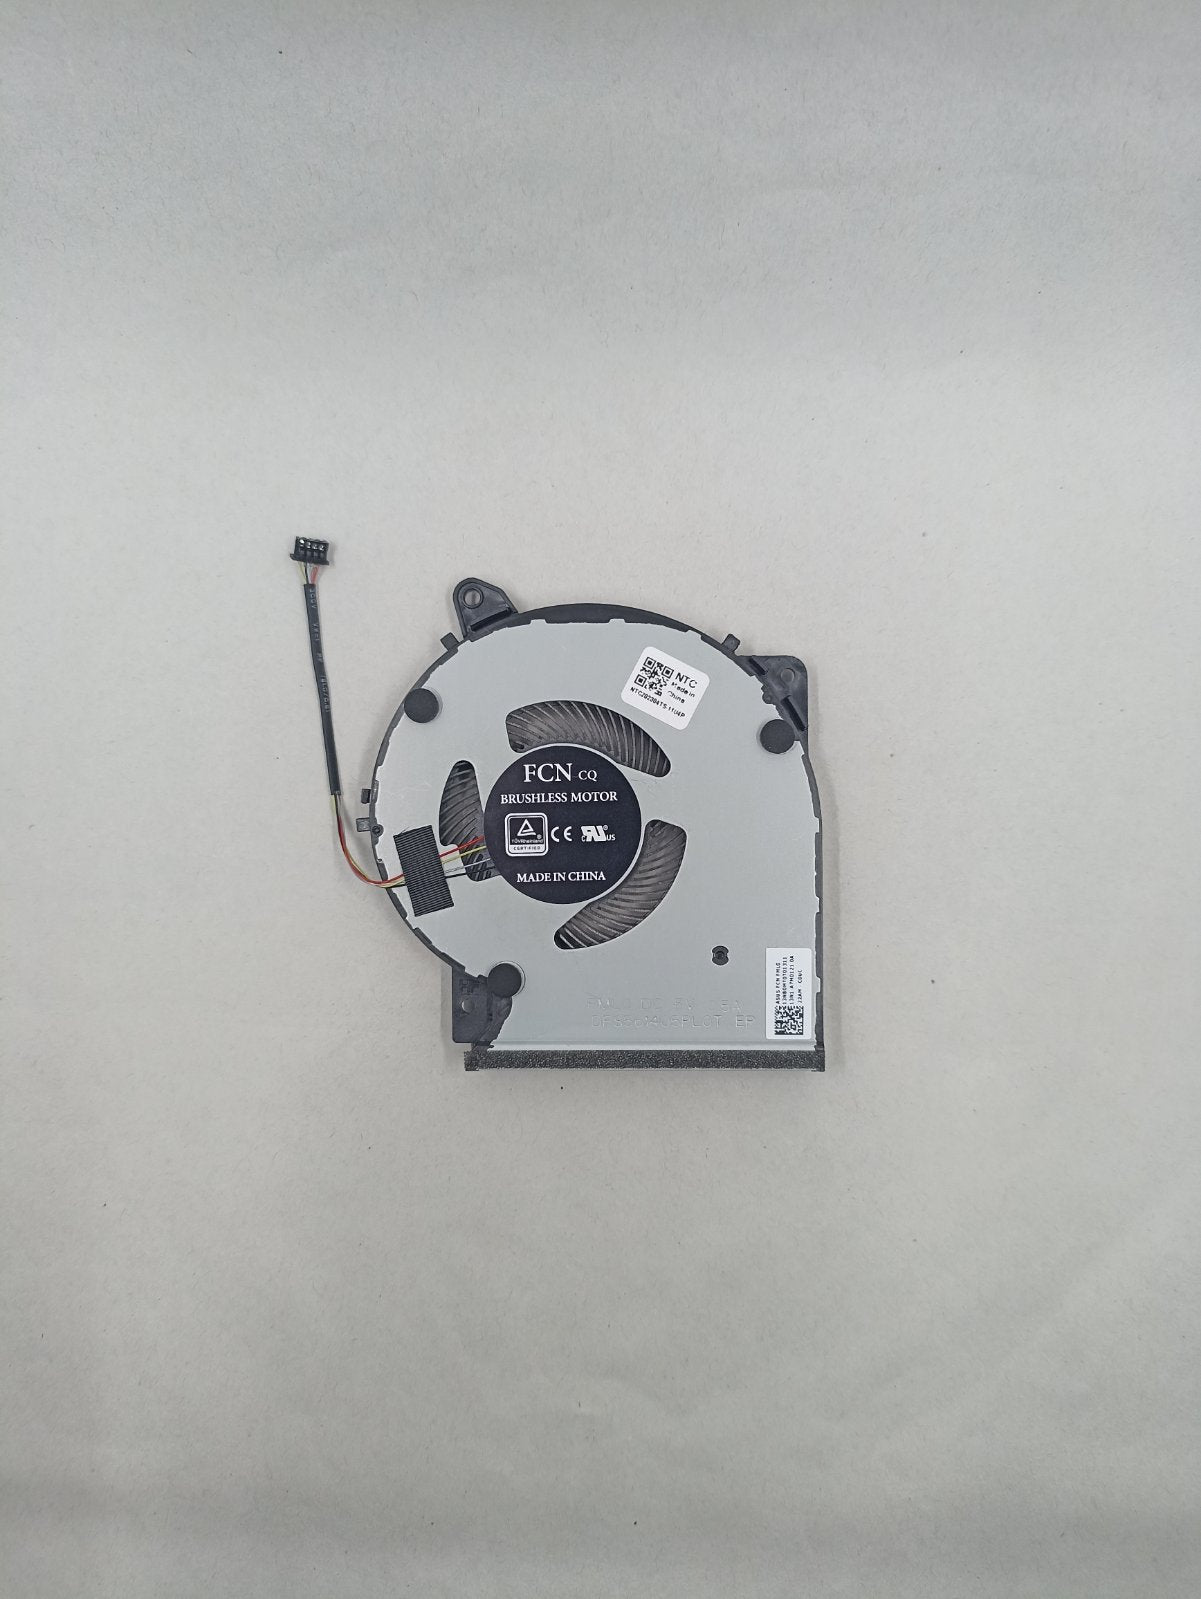 Replacement Fan for Asus X409JB WL